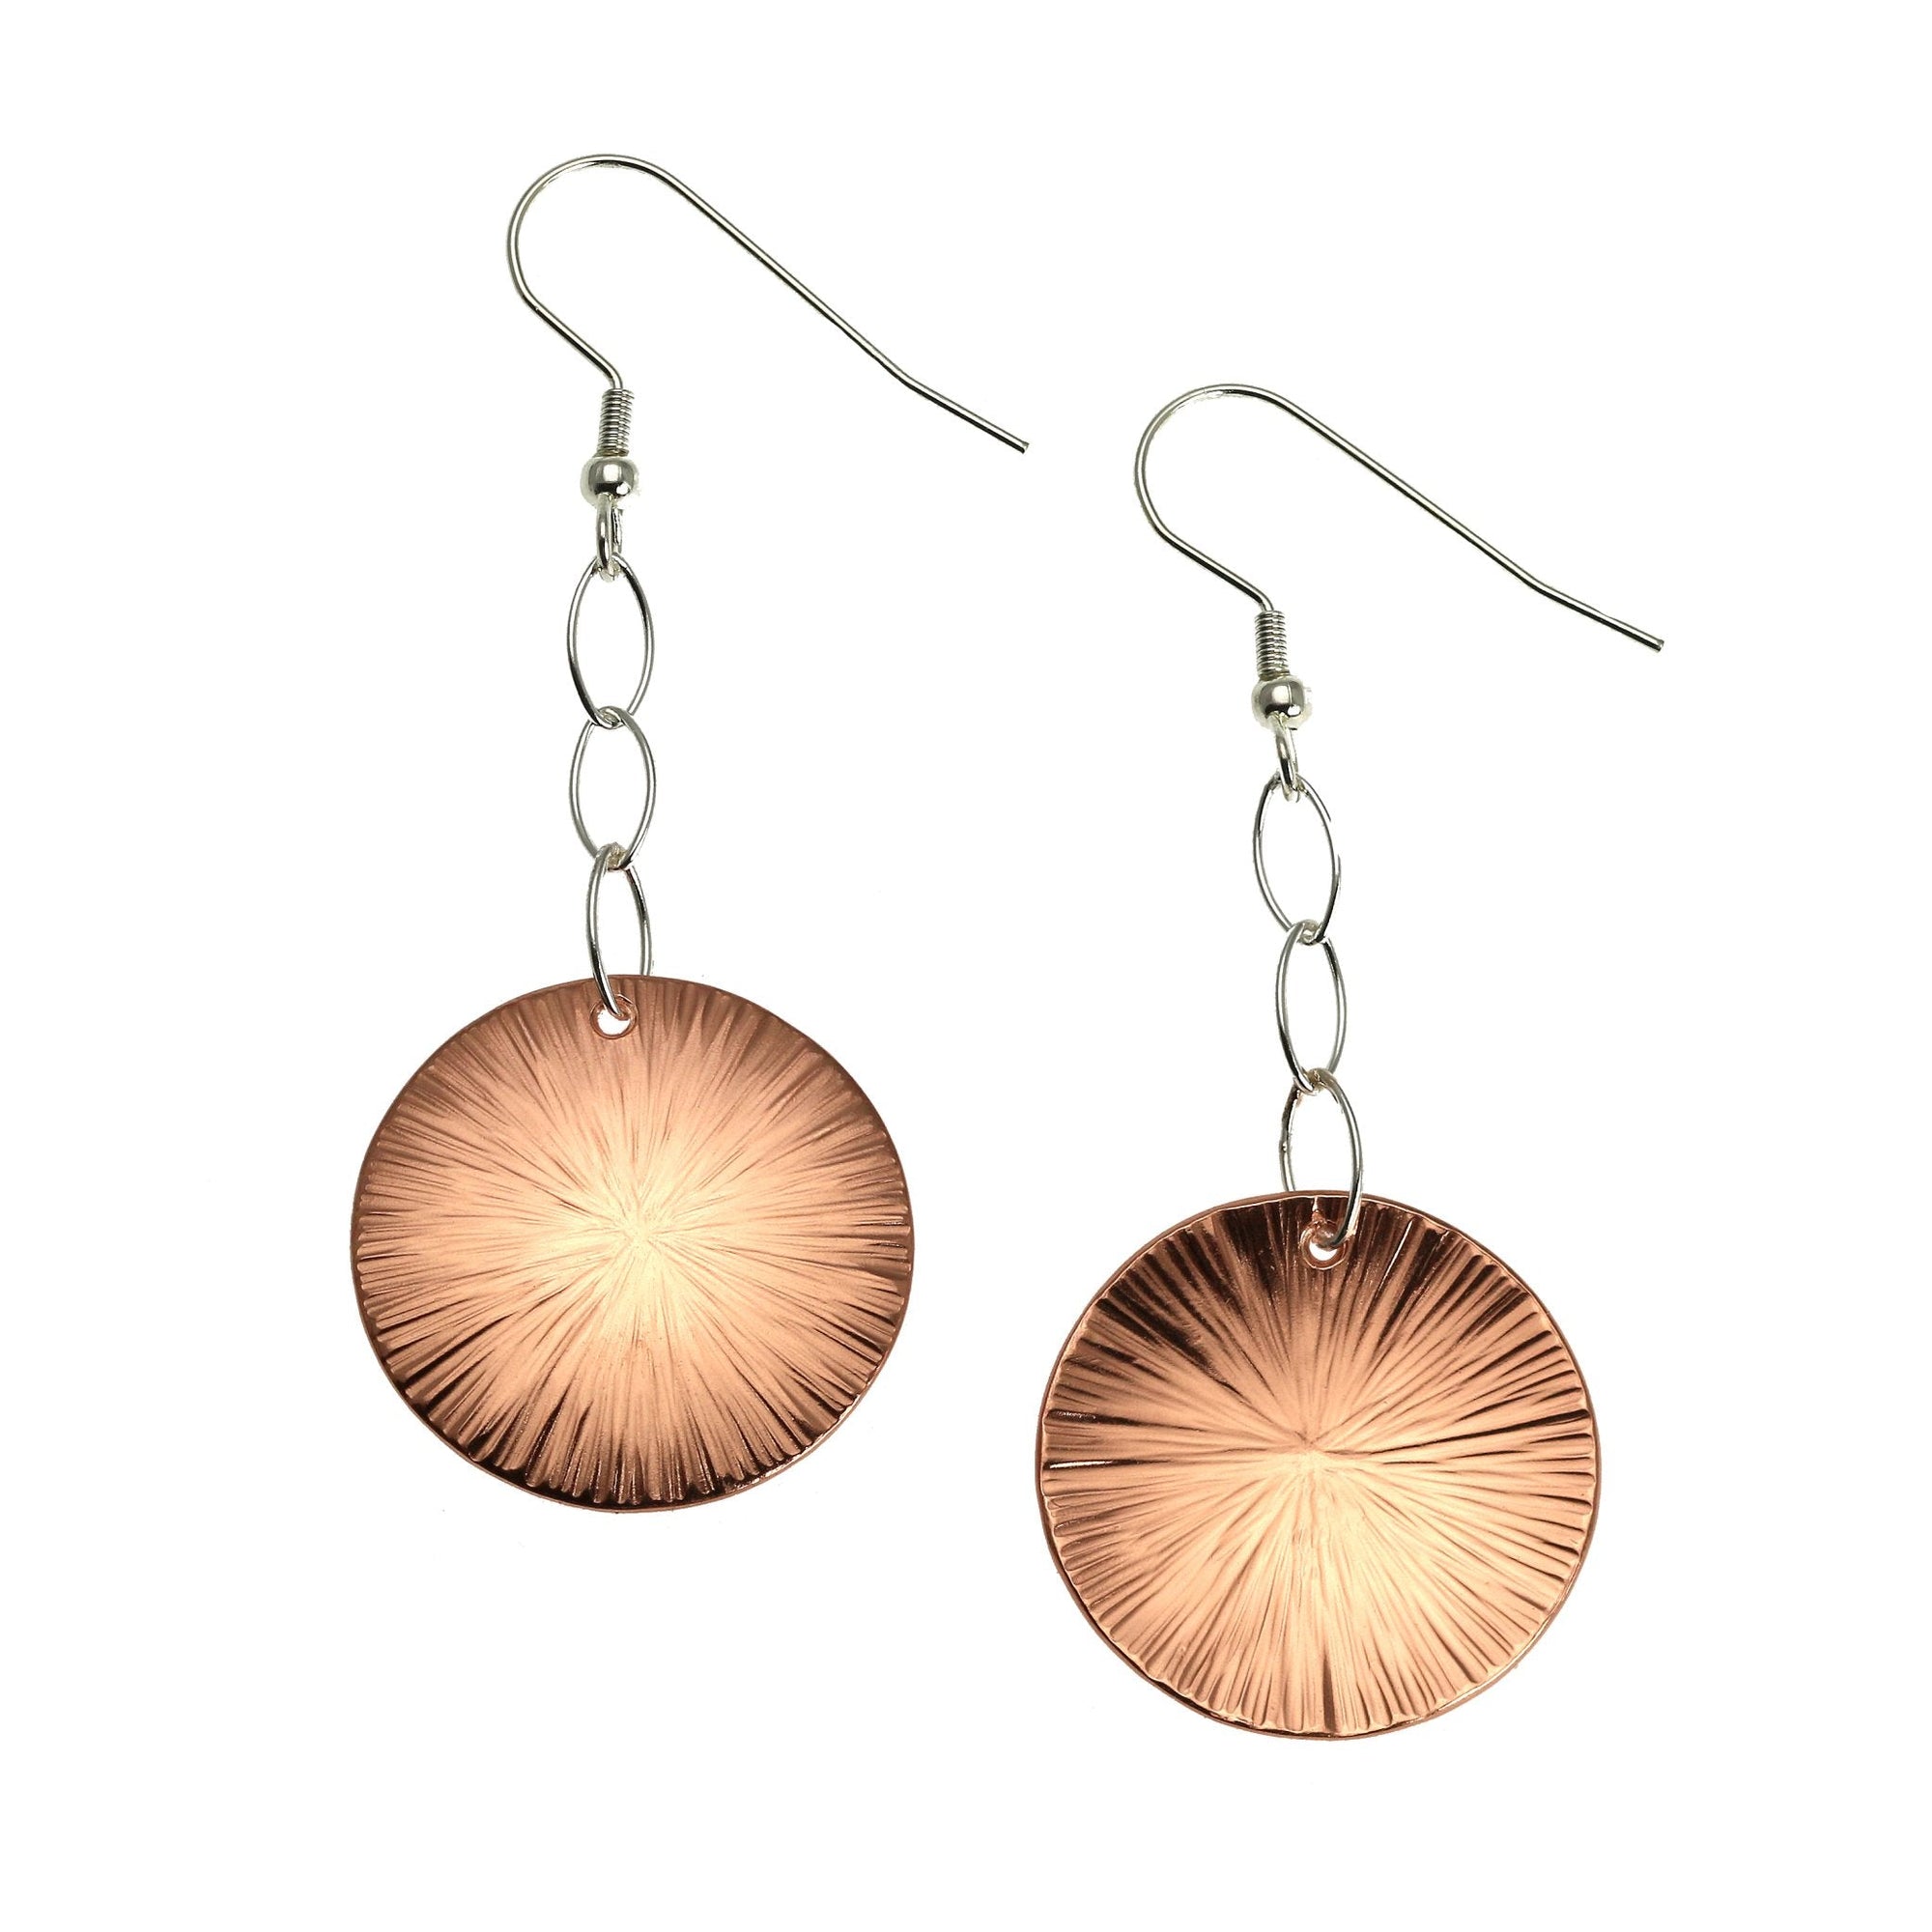 Detail View of Chased Disc Copper Dangle Earrings